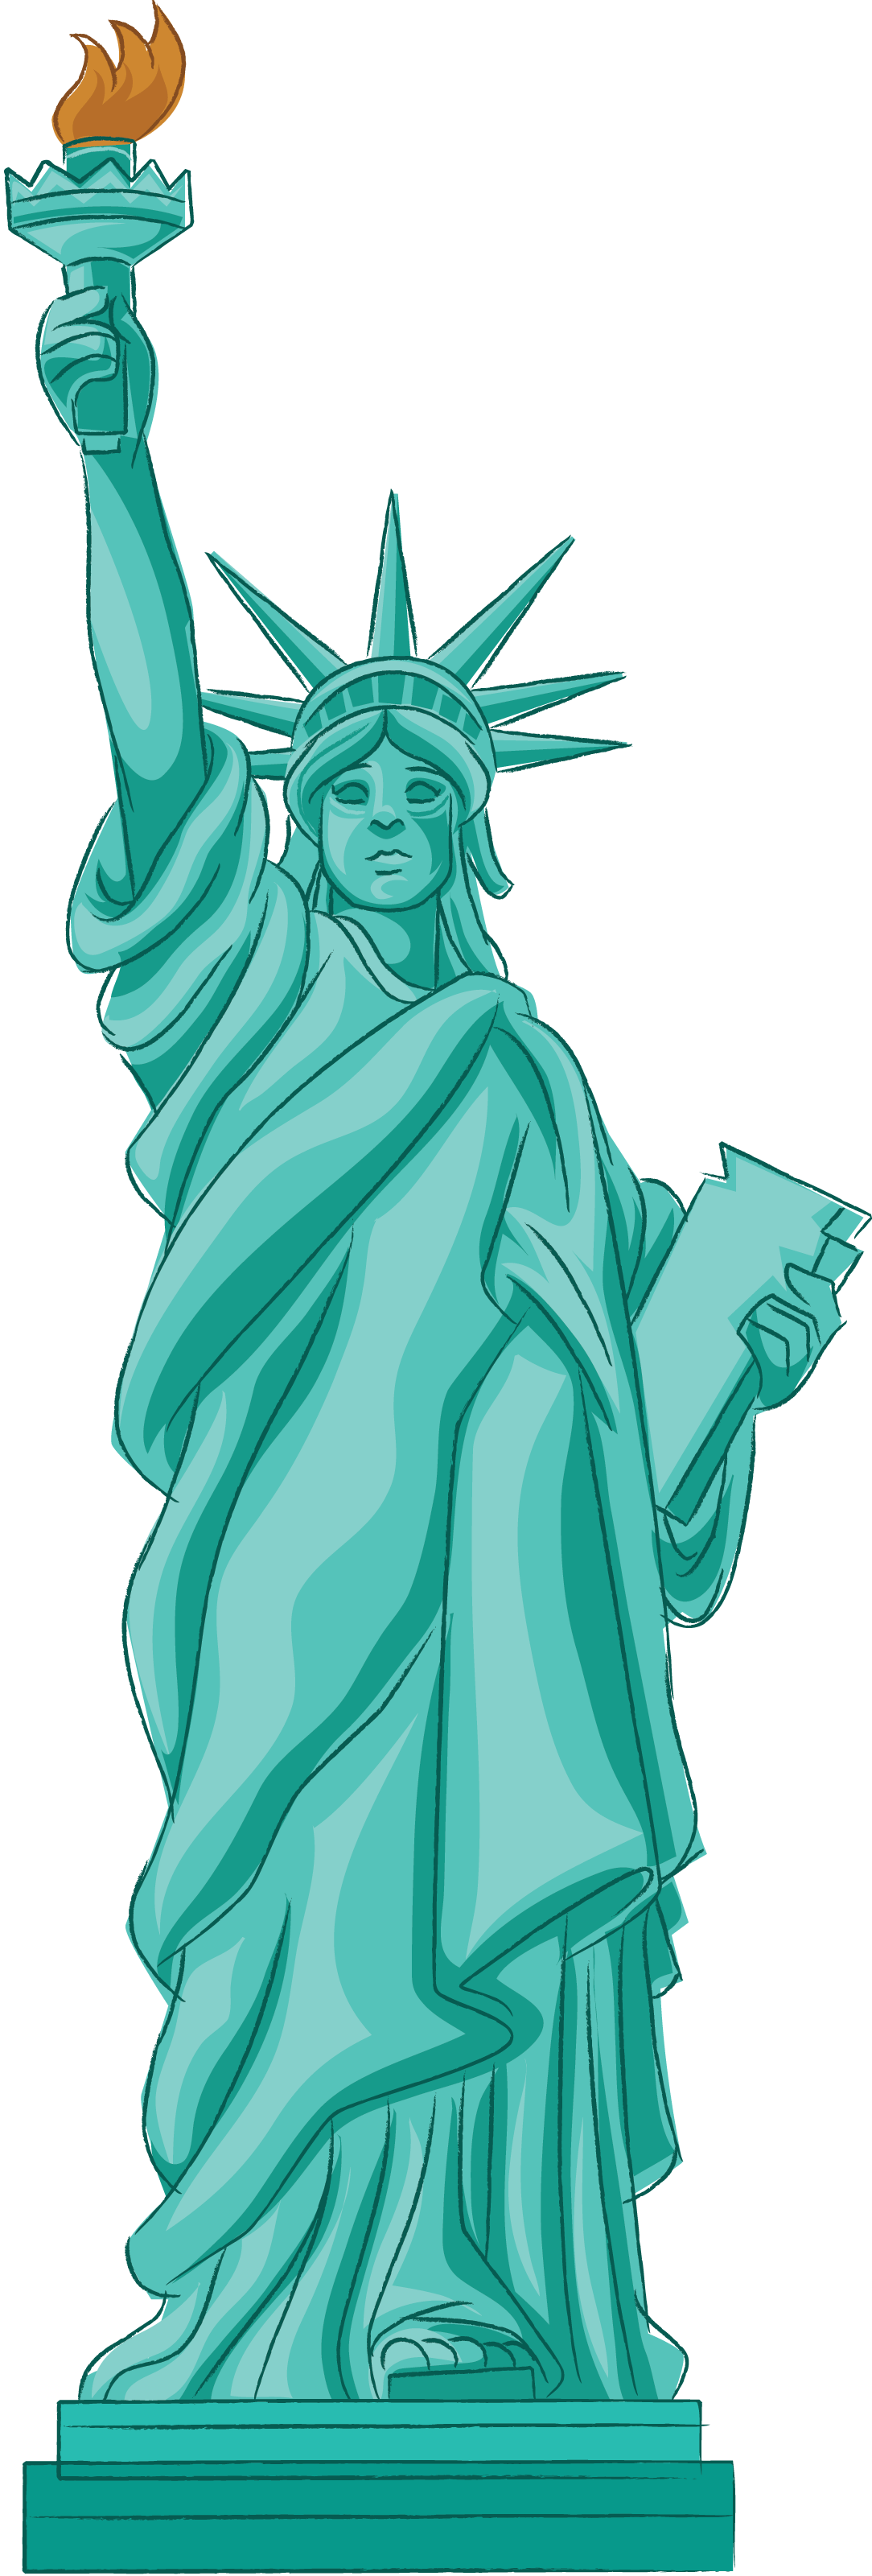 cliparts statue of liberty - Clip Art Library.